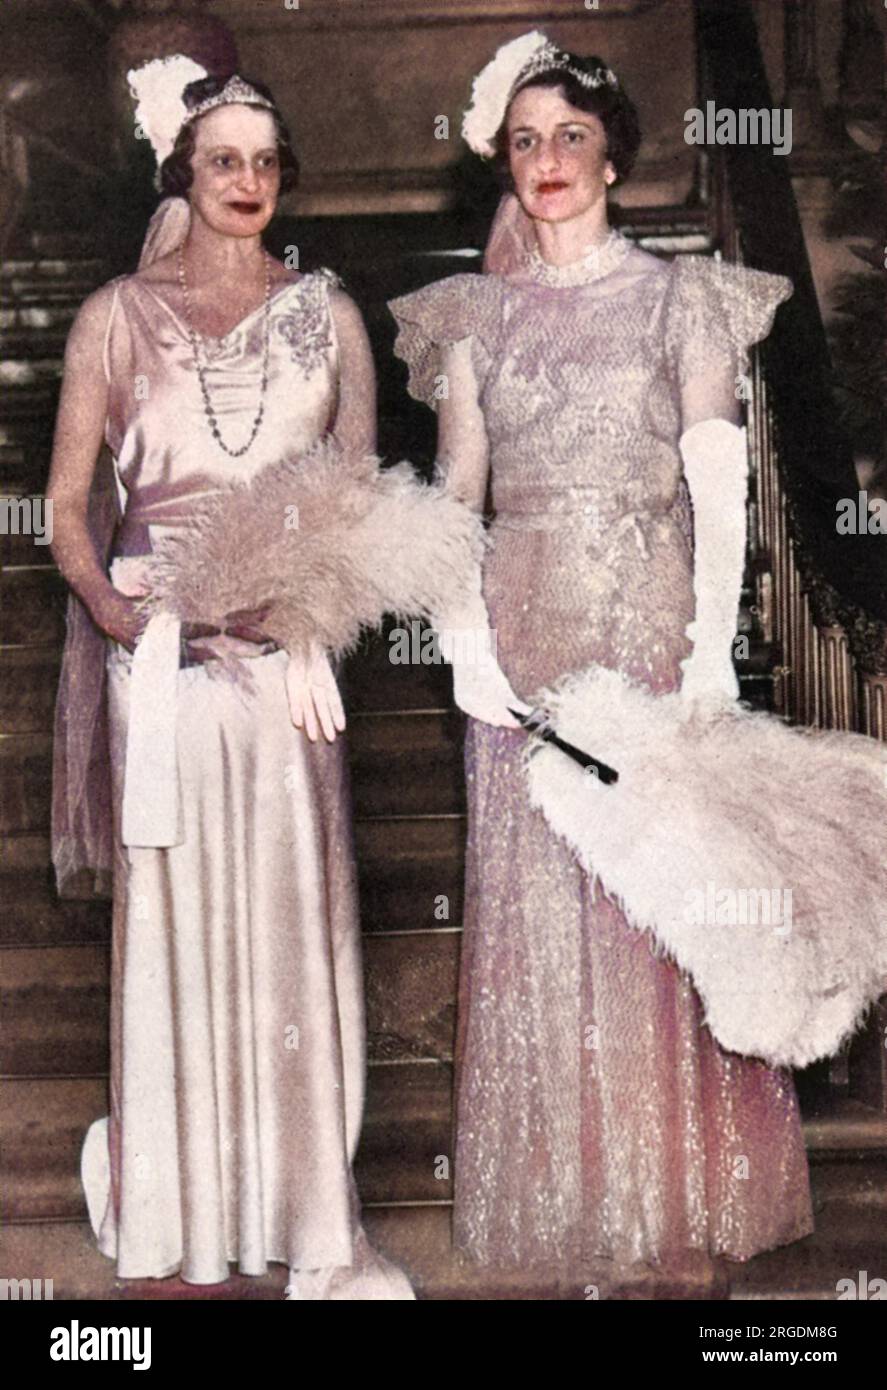 Lady Willoughby de Eresby and Mrs Ronald Tree (better known as Nancy Lancaster), billed in The Tatler as M.P.'s wives on their presentation at court at Buckingham Palace. Nancy Lancaster (1897 - 1994), nee Perkins, was an influential American-born tastemaker, interior decorator and garden designer. She married Ronald Tree in 1920, moving to Britain in 1927; the couple divorced in 1947 and she married Claude Lancaster in 1948. She was associated with the English Country House Style. Stock Photo